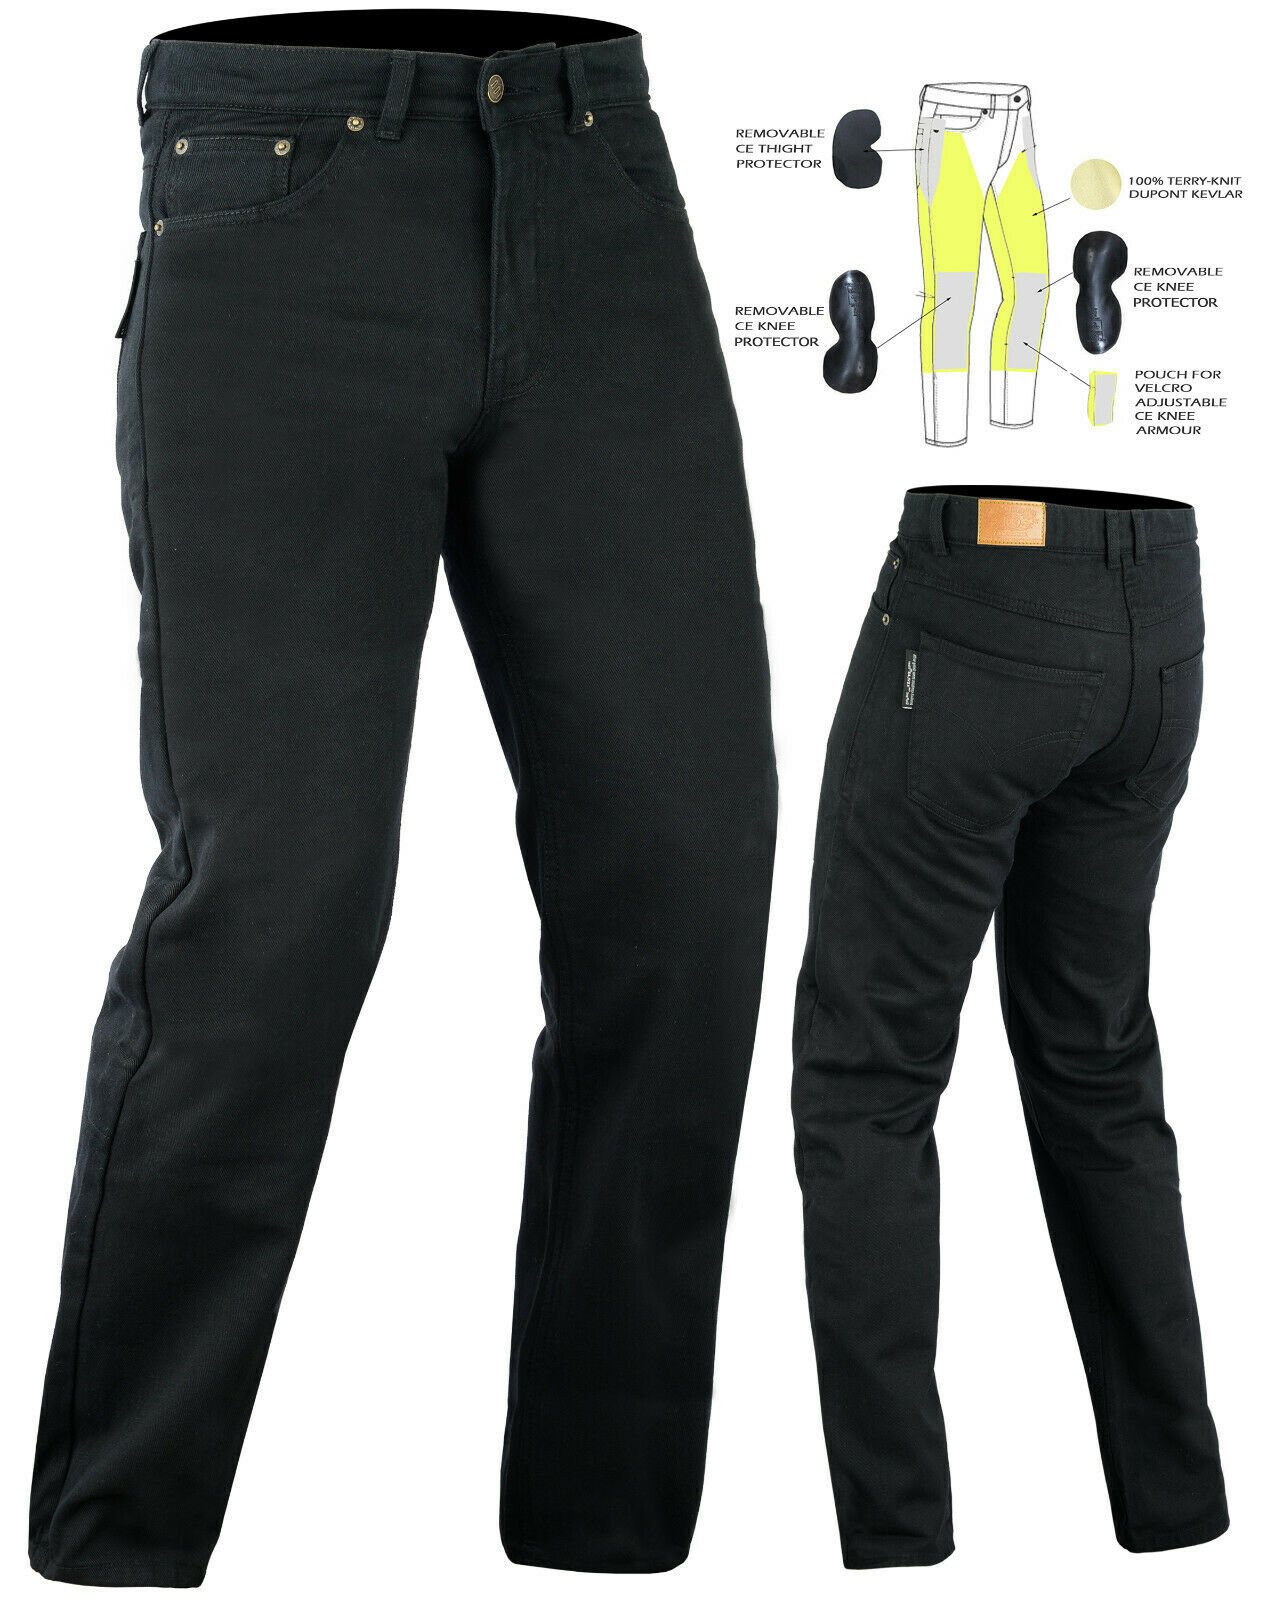 Mens Motorcycle Jeans Motorbike Black Denim Trousers Lined with Kevlar CE  Armour  eBay